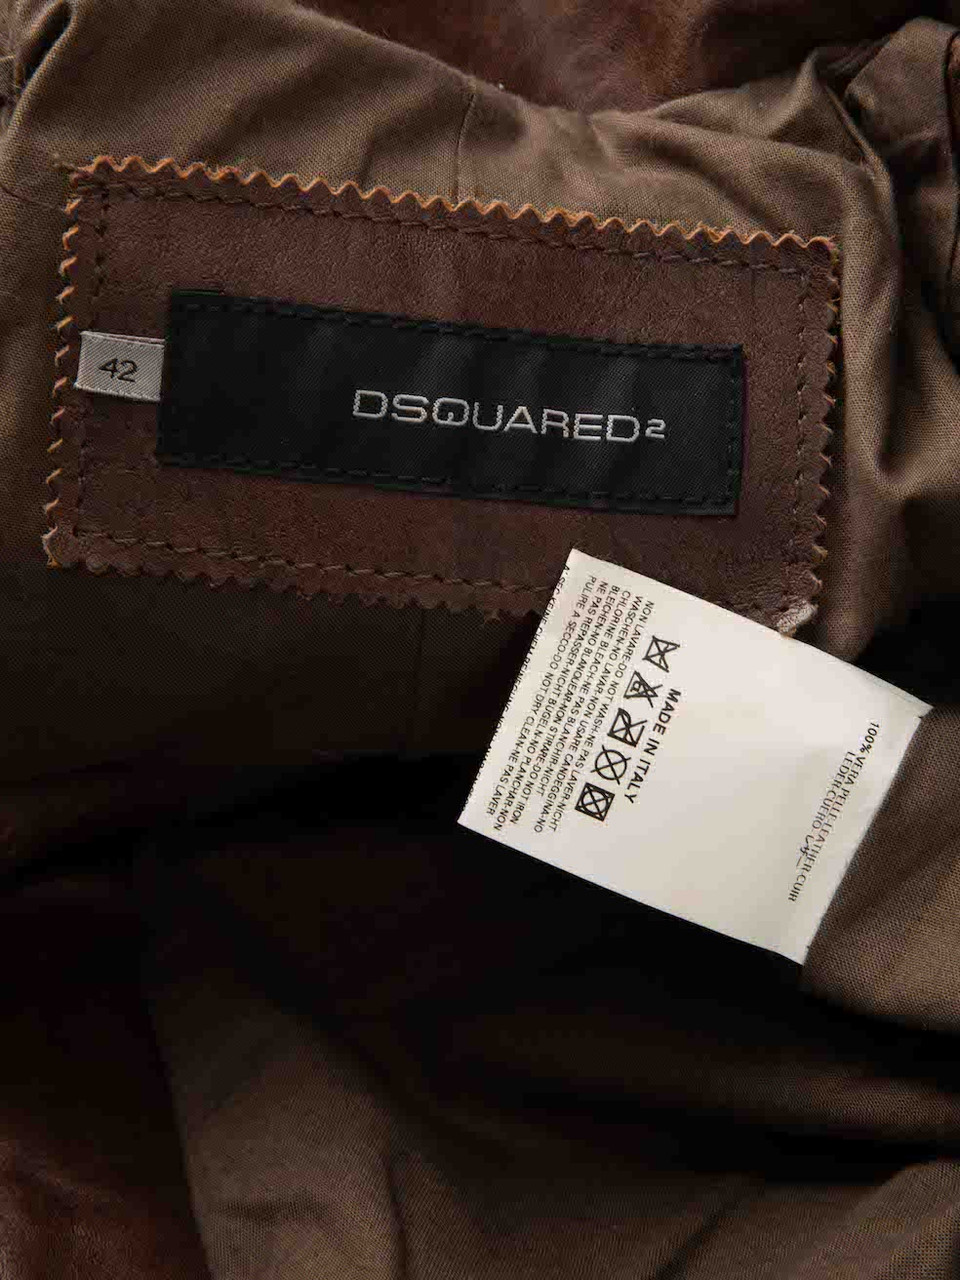 Dsquared2 Brown Leather Distressed Jacket